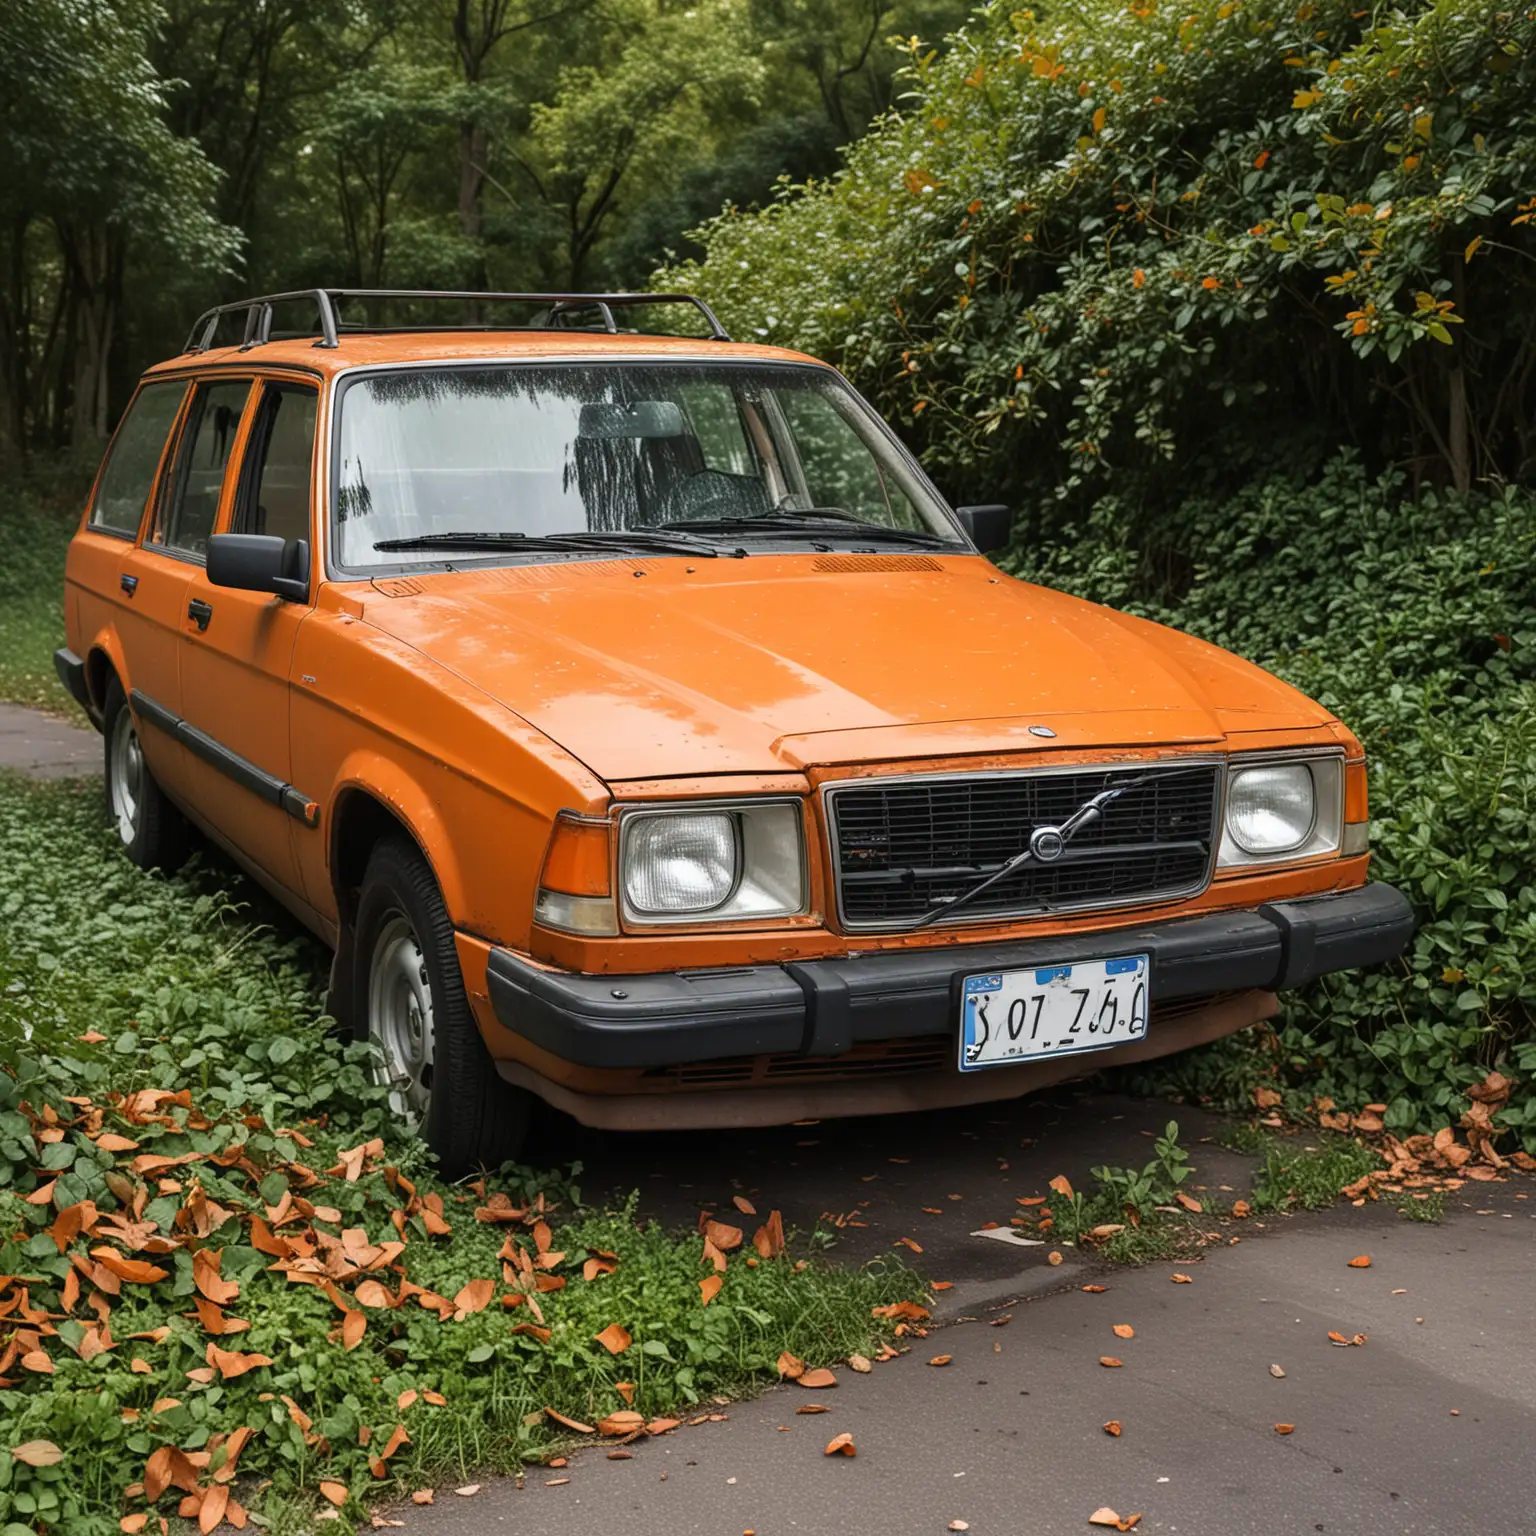 Abandoned 1970s Style Orange Volvo Covered in Overgrowth